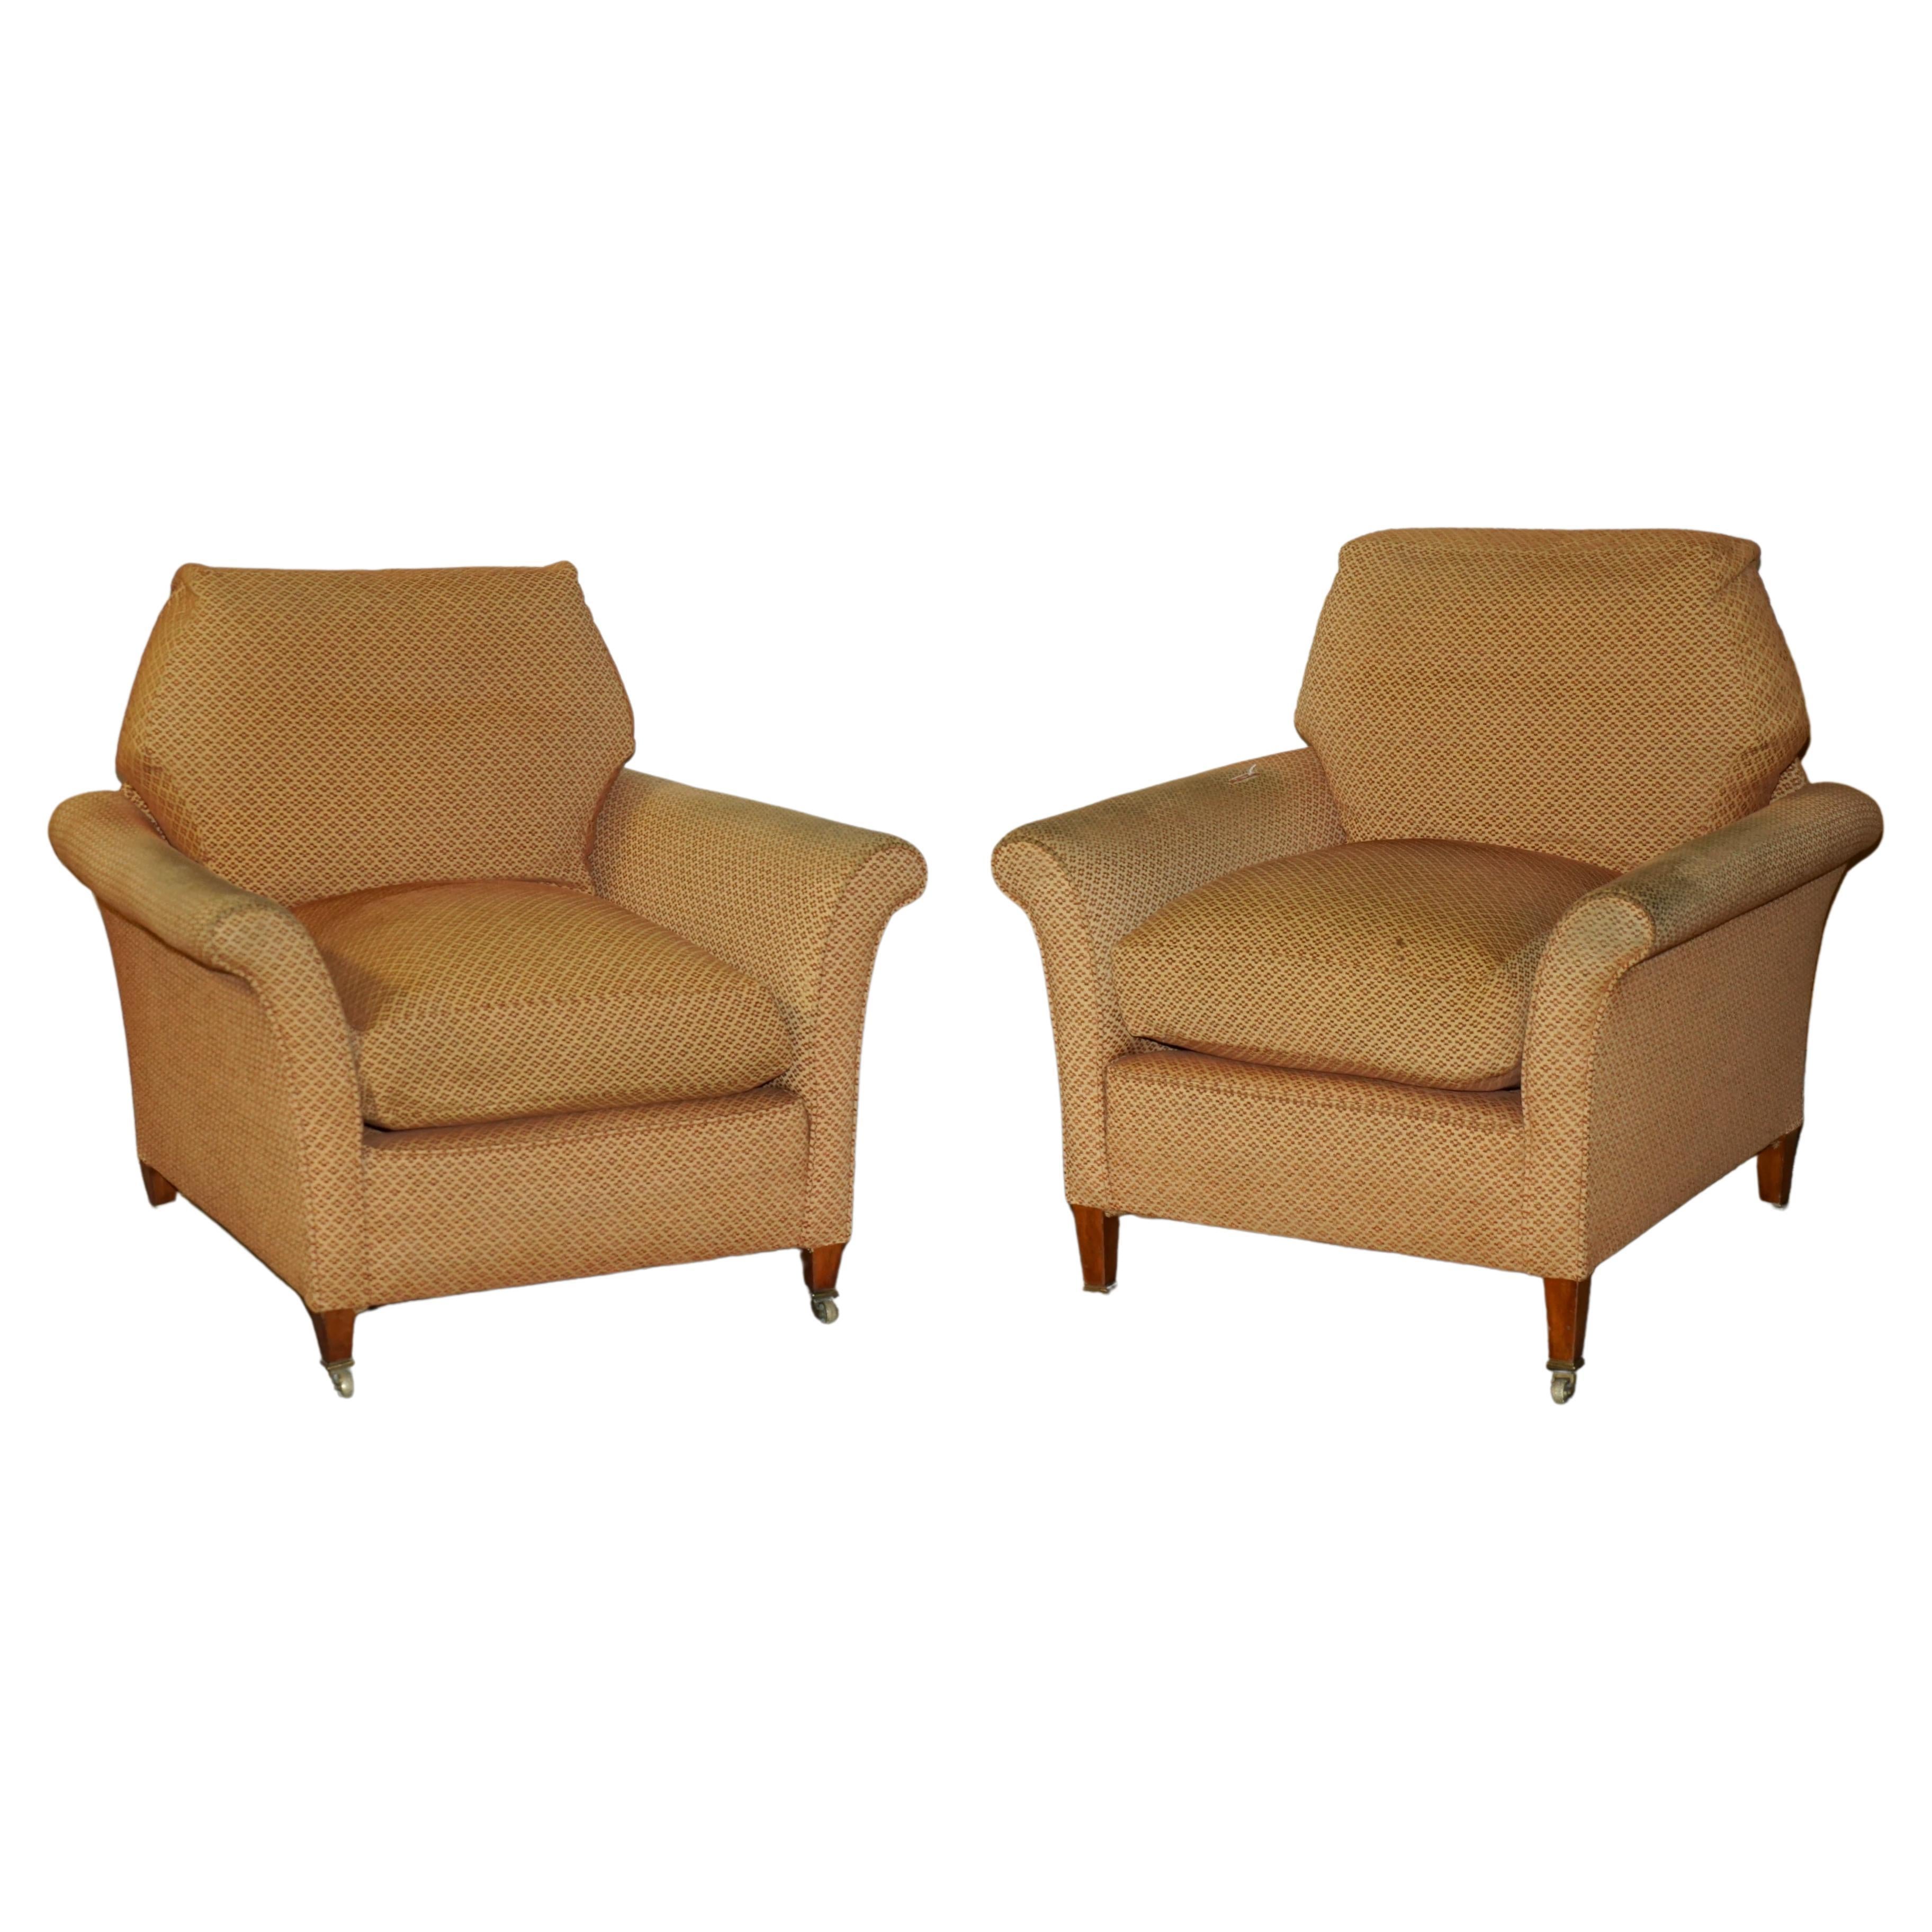 PAIR OF ANTIQUE ViCTORIAN HOWARD & SON'S ARMCHAIRS FOR UPHOLSTERY RESTORATION For Sale